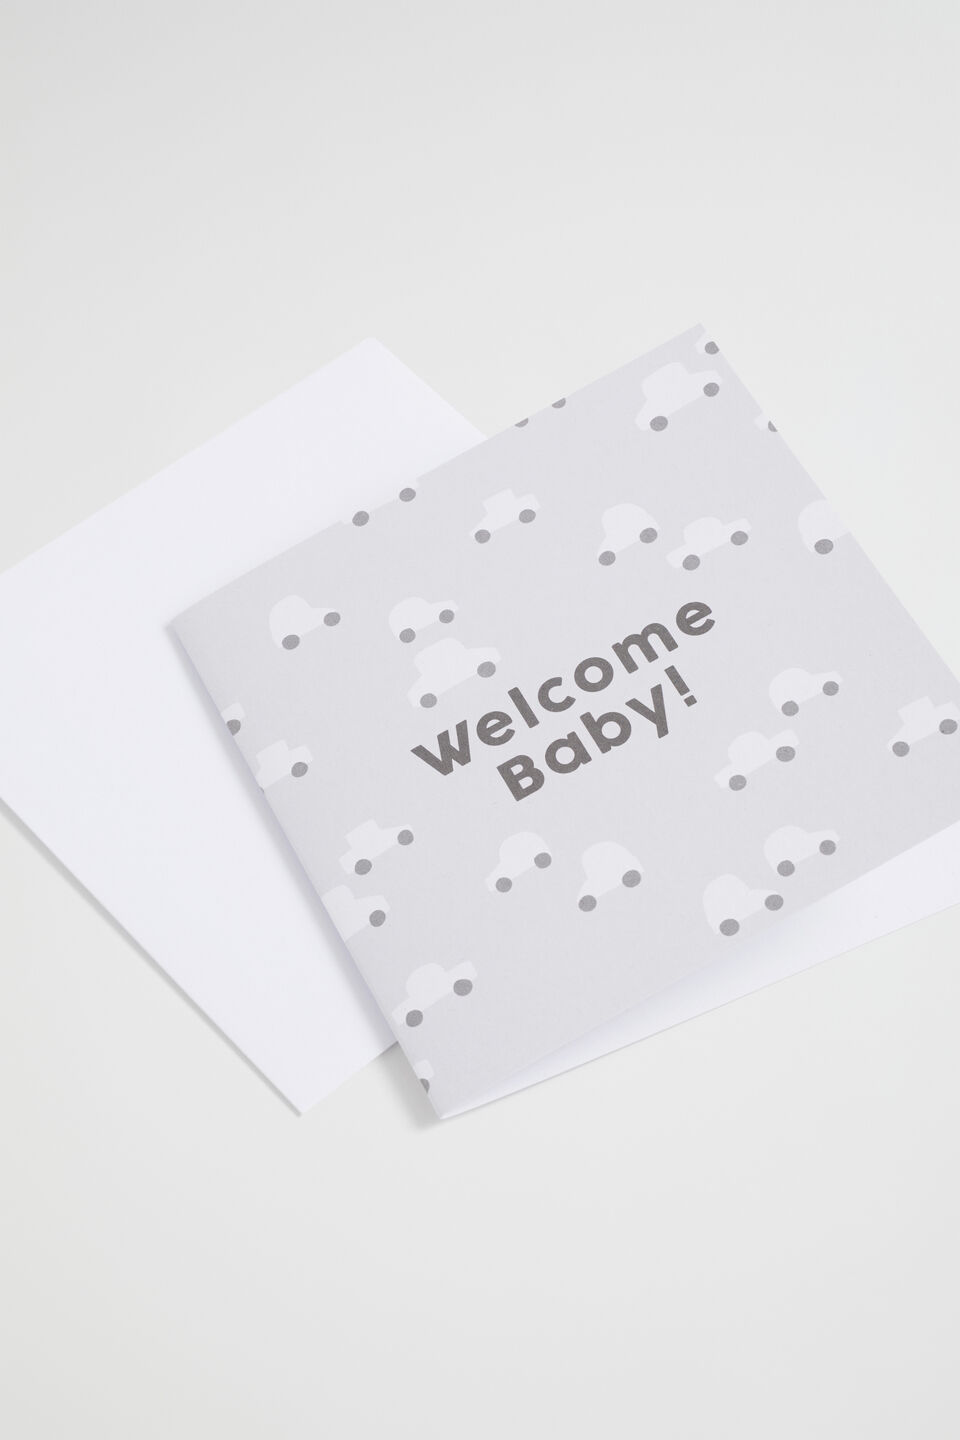 Large Welcome Baby Car Card  Multi